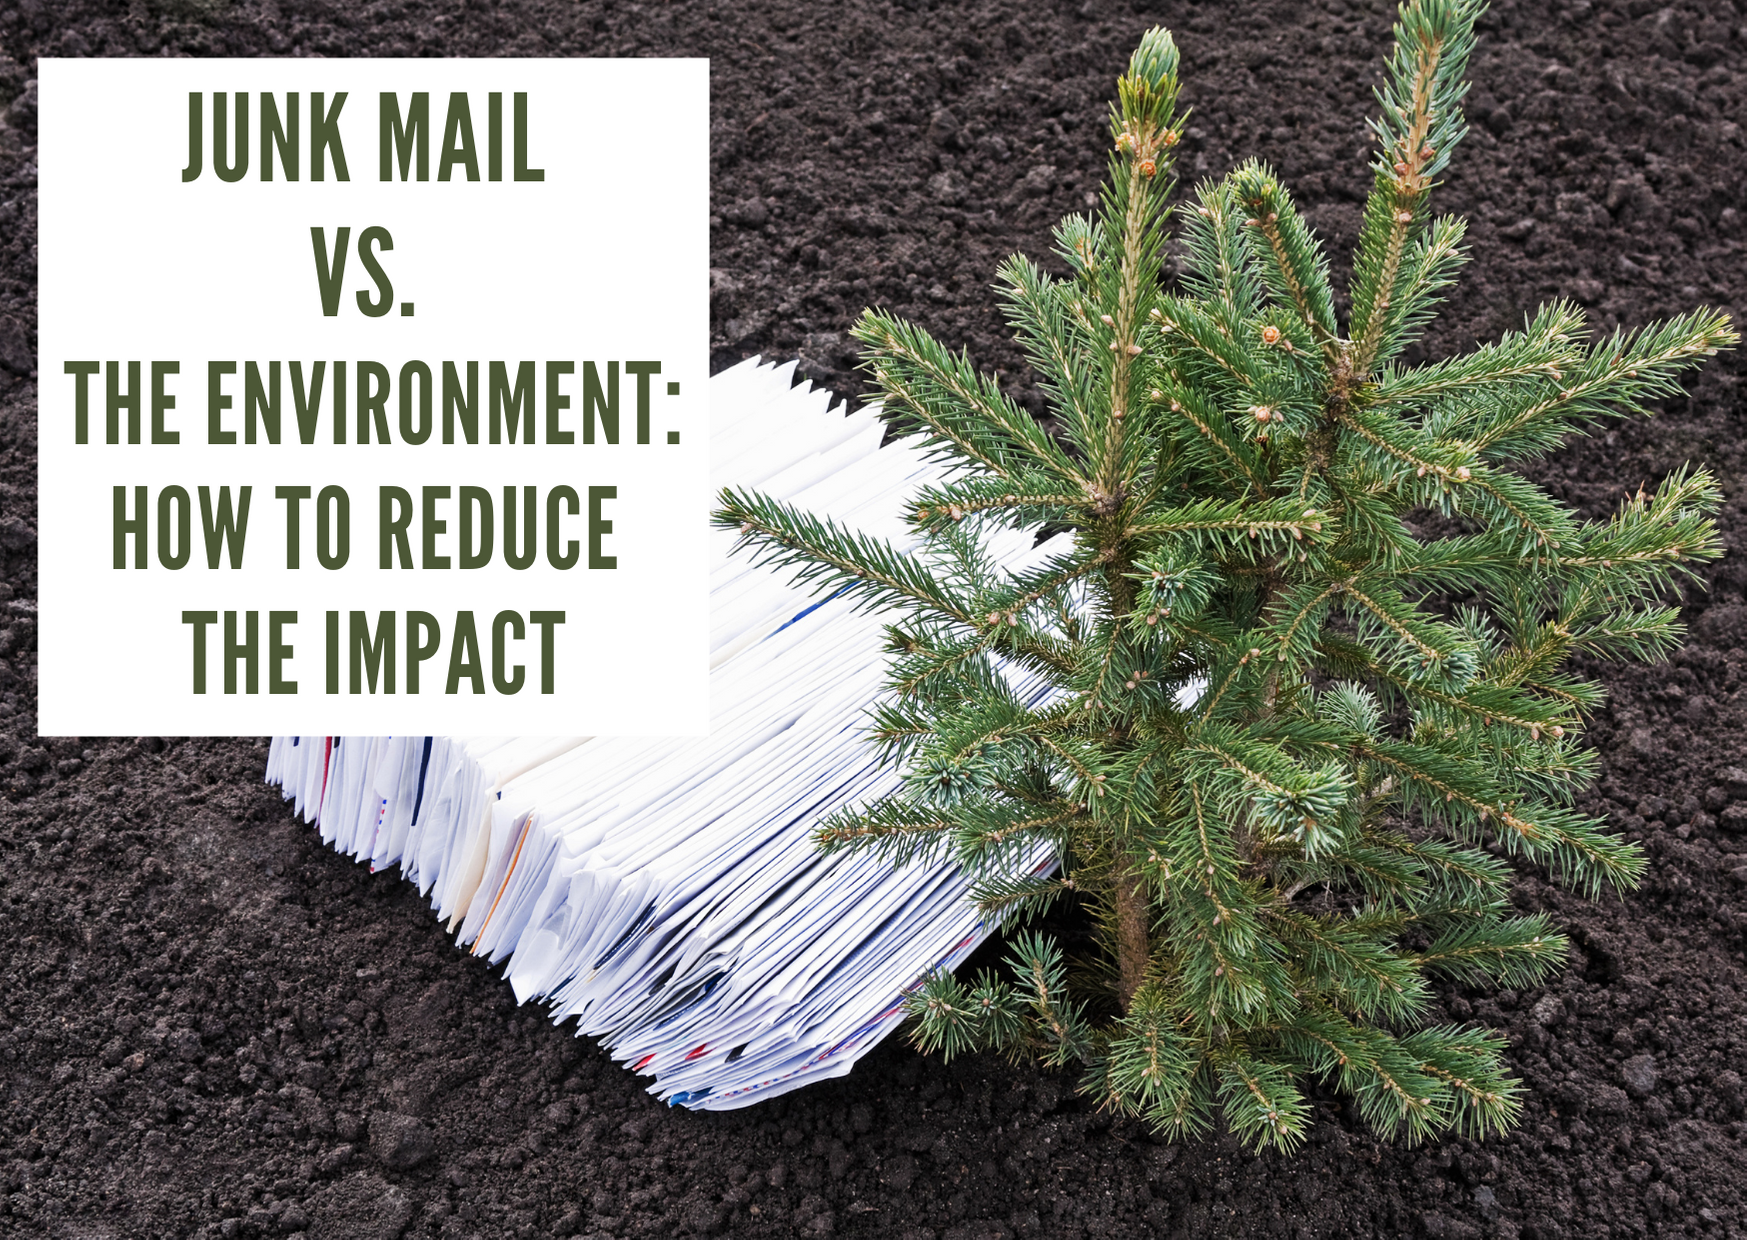 Junk Mail vs. The Environment: How to Reduce The Impact